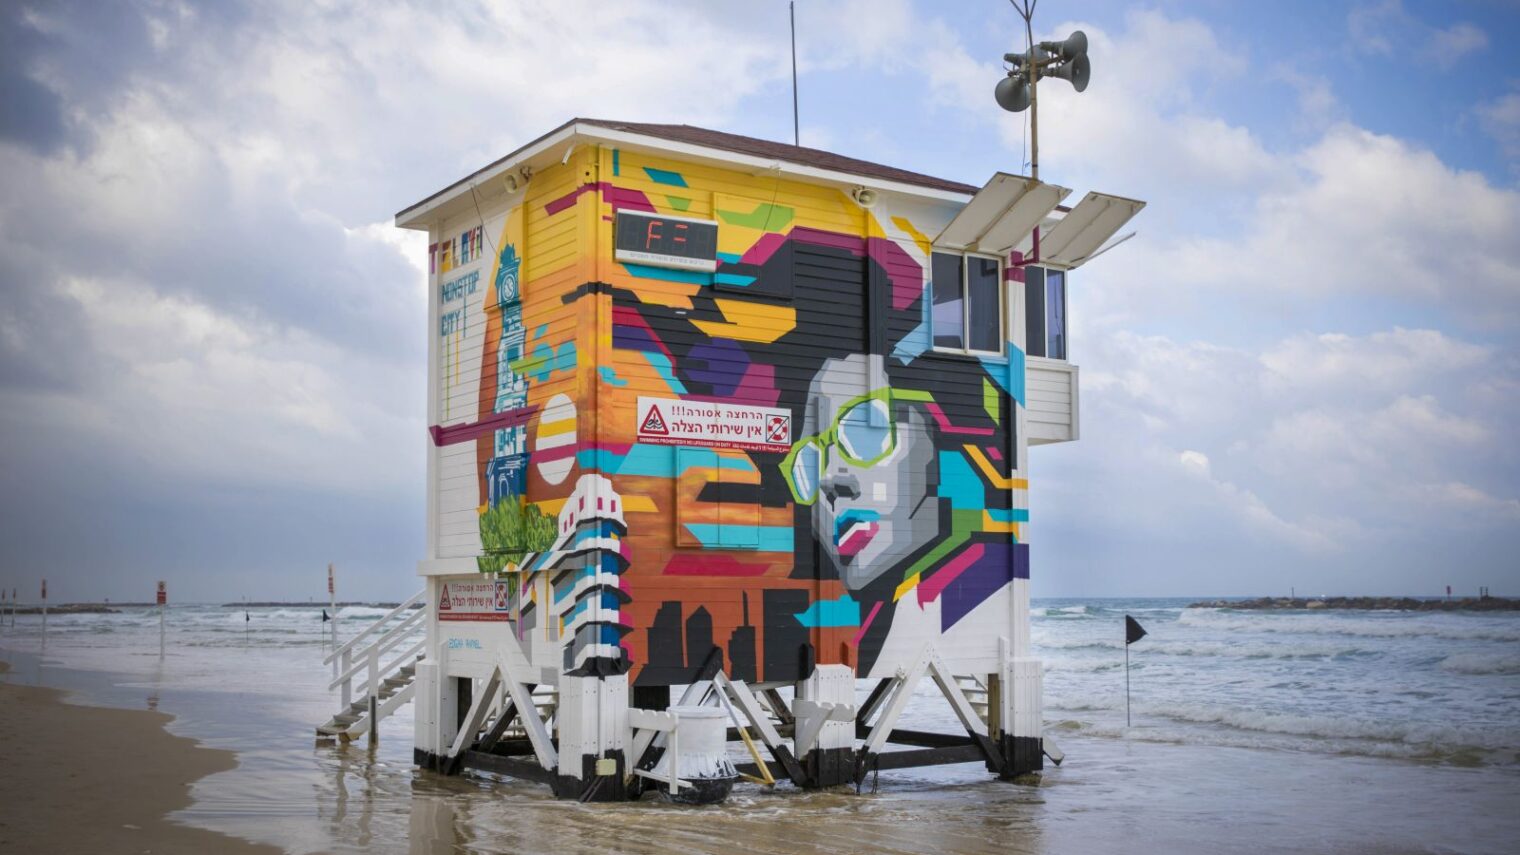 The popup hotel in a lifeguard tower on Frishman Beach, Tel Aviv, March 14, 2017. Photo by Guy Yehieli